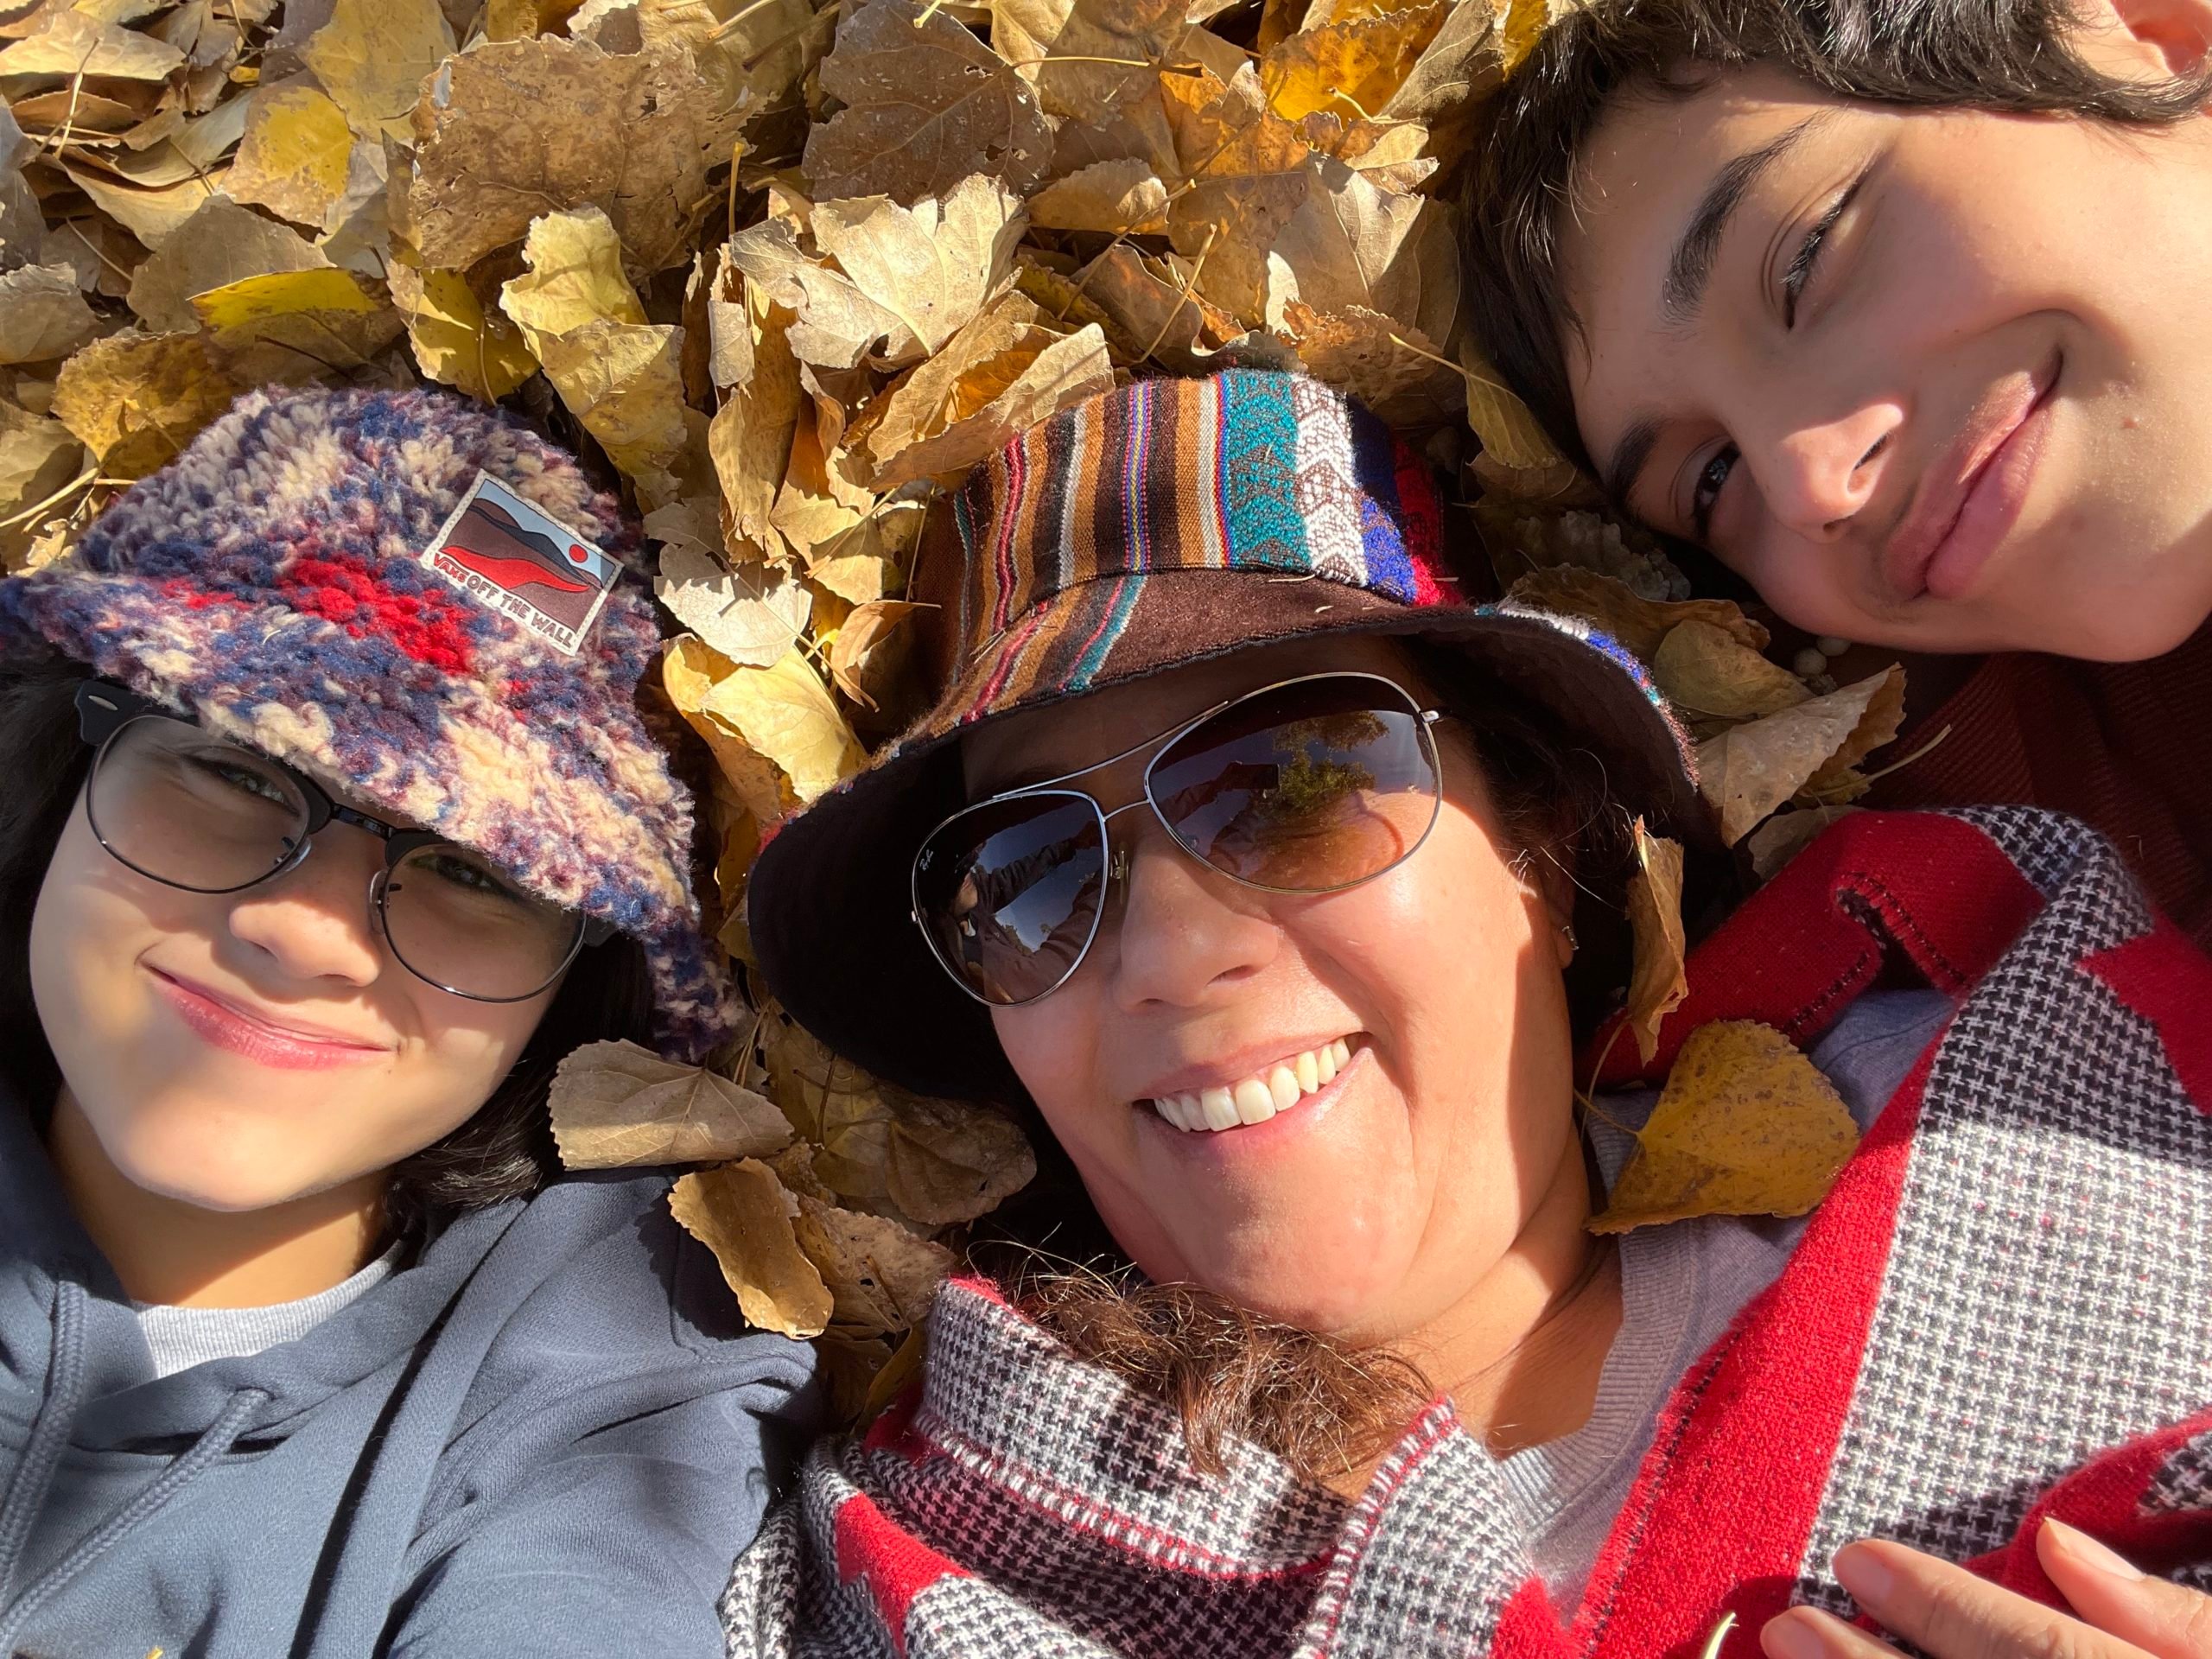 An adult woman poses in a pile of autumn leaves with two children, a boy to the right and a girl to the left, all in cozy clothing.